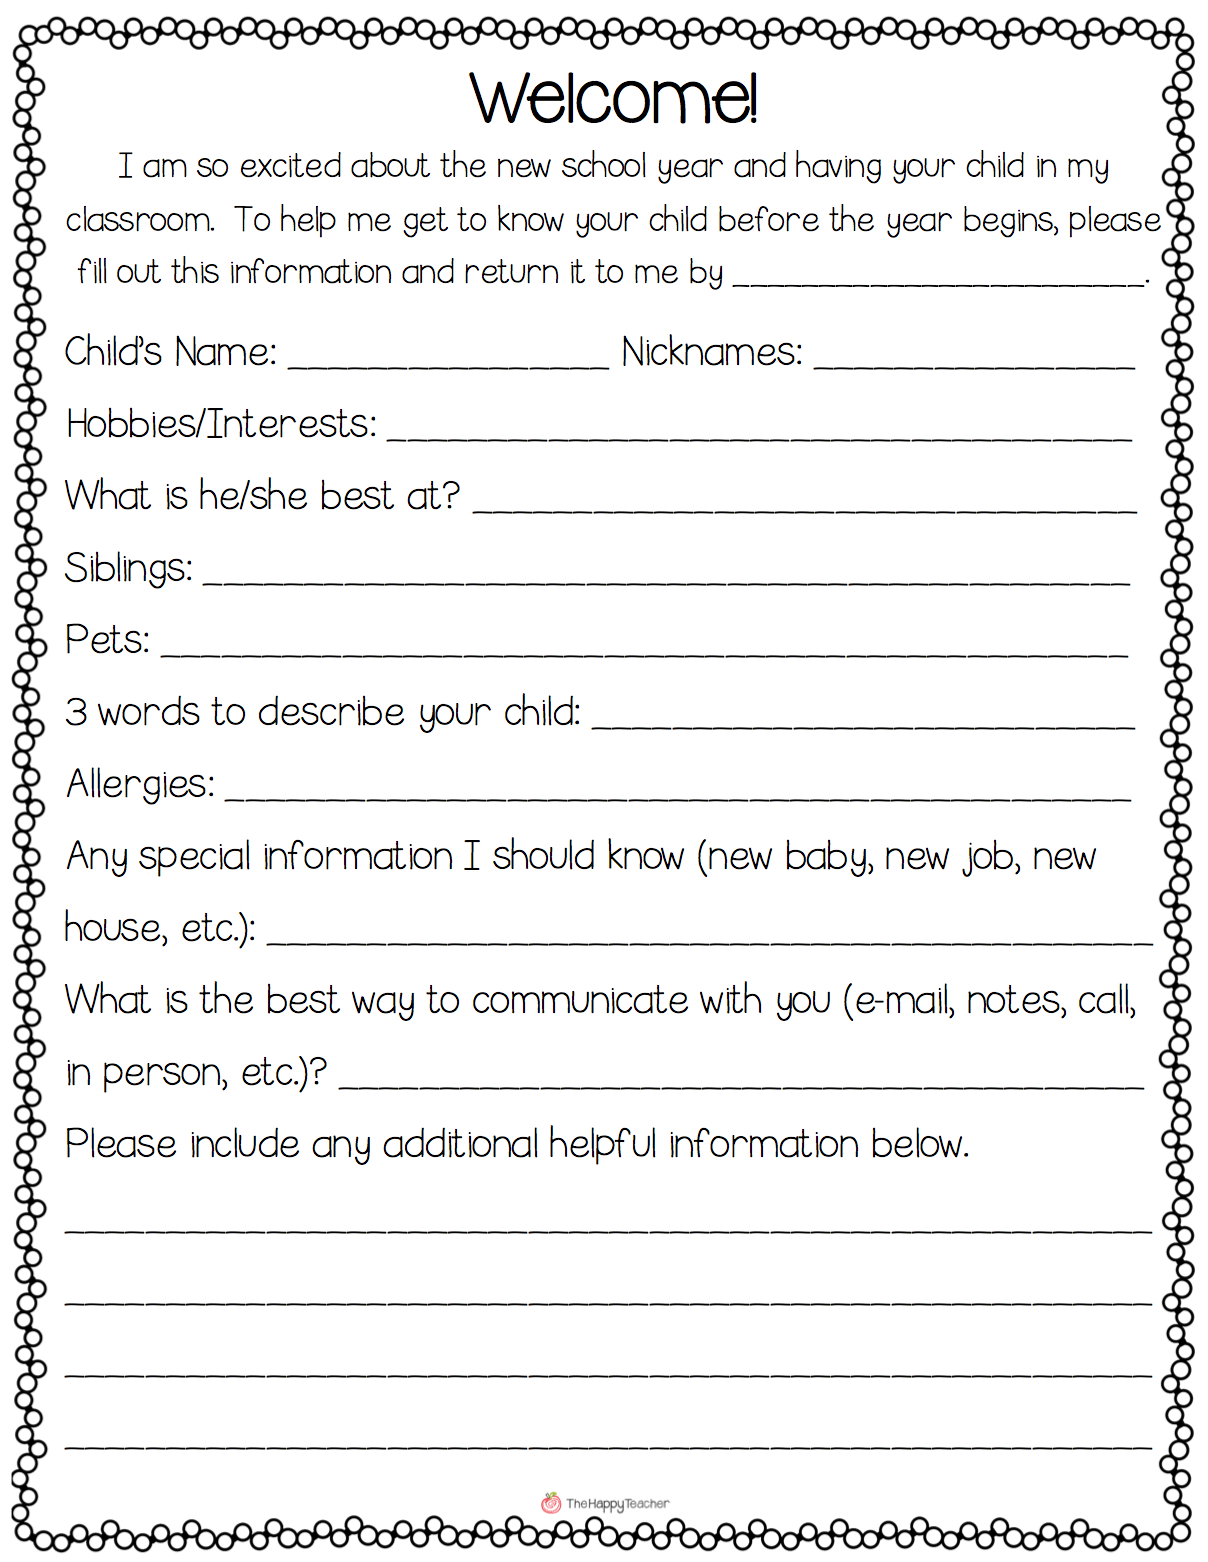 Teacher Welcome Letter to Parents Template - Open A Positive Line Of Munication with Parents From Day 1